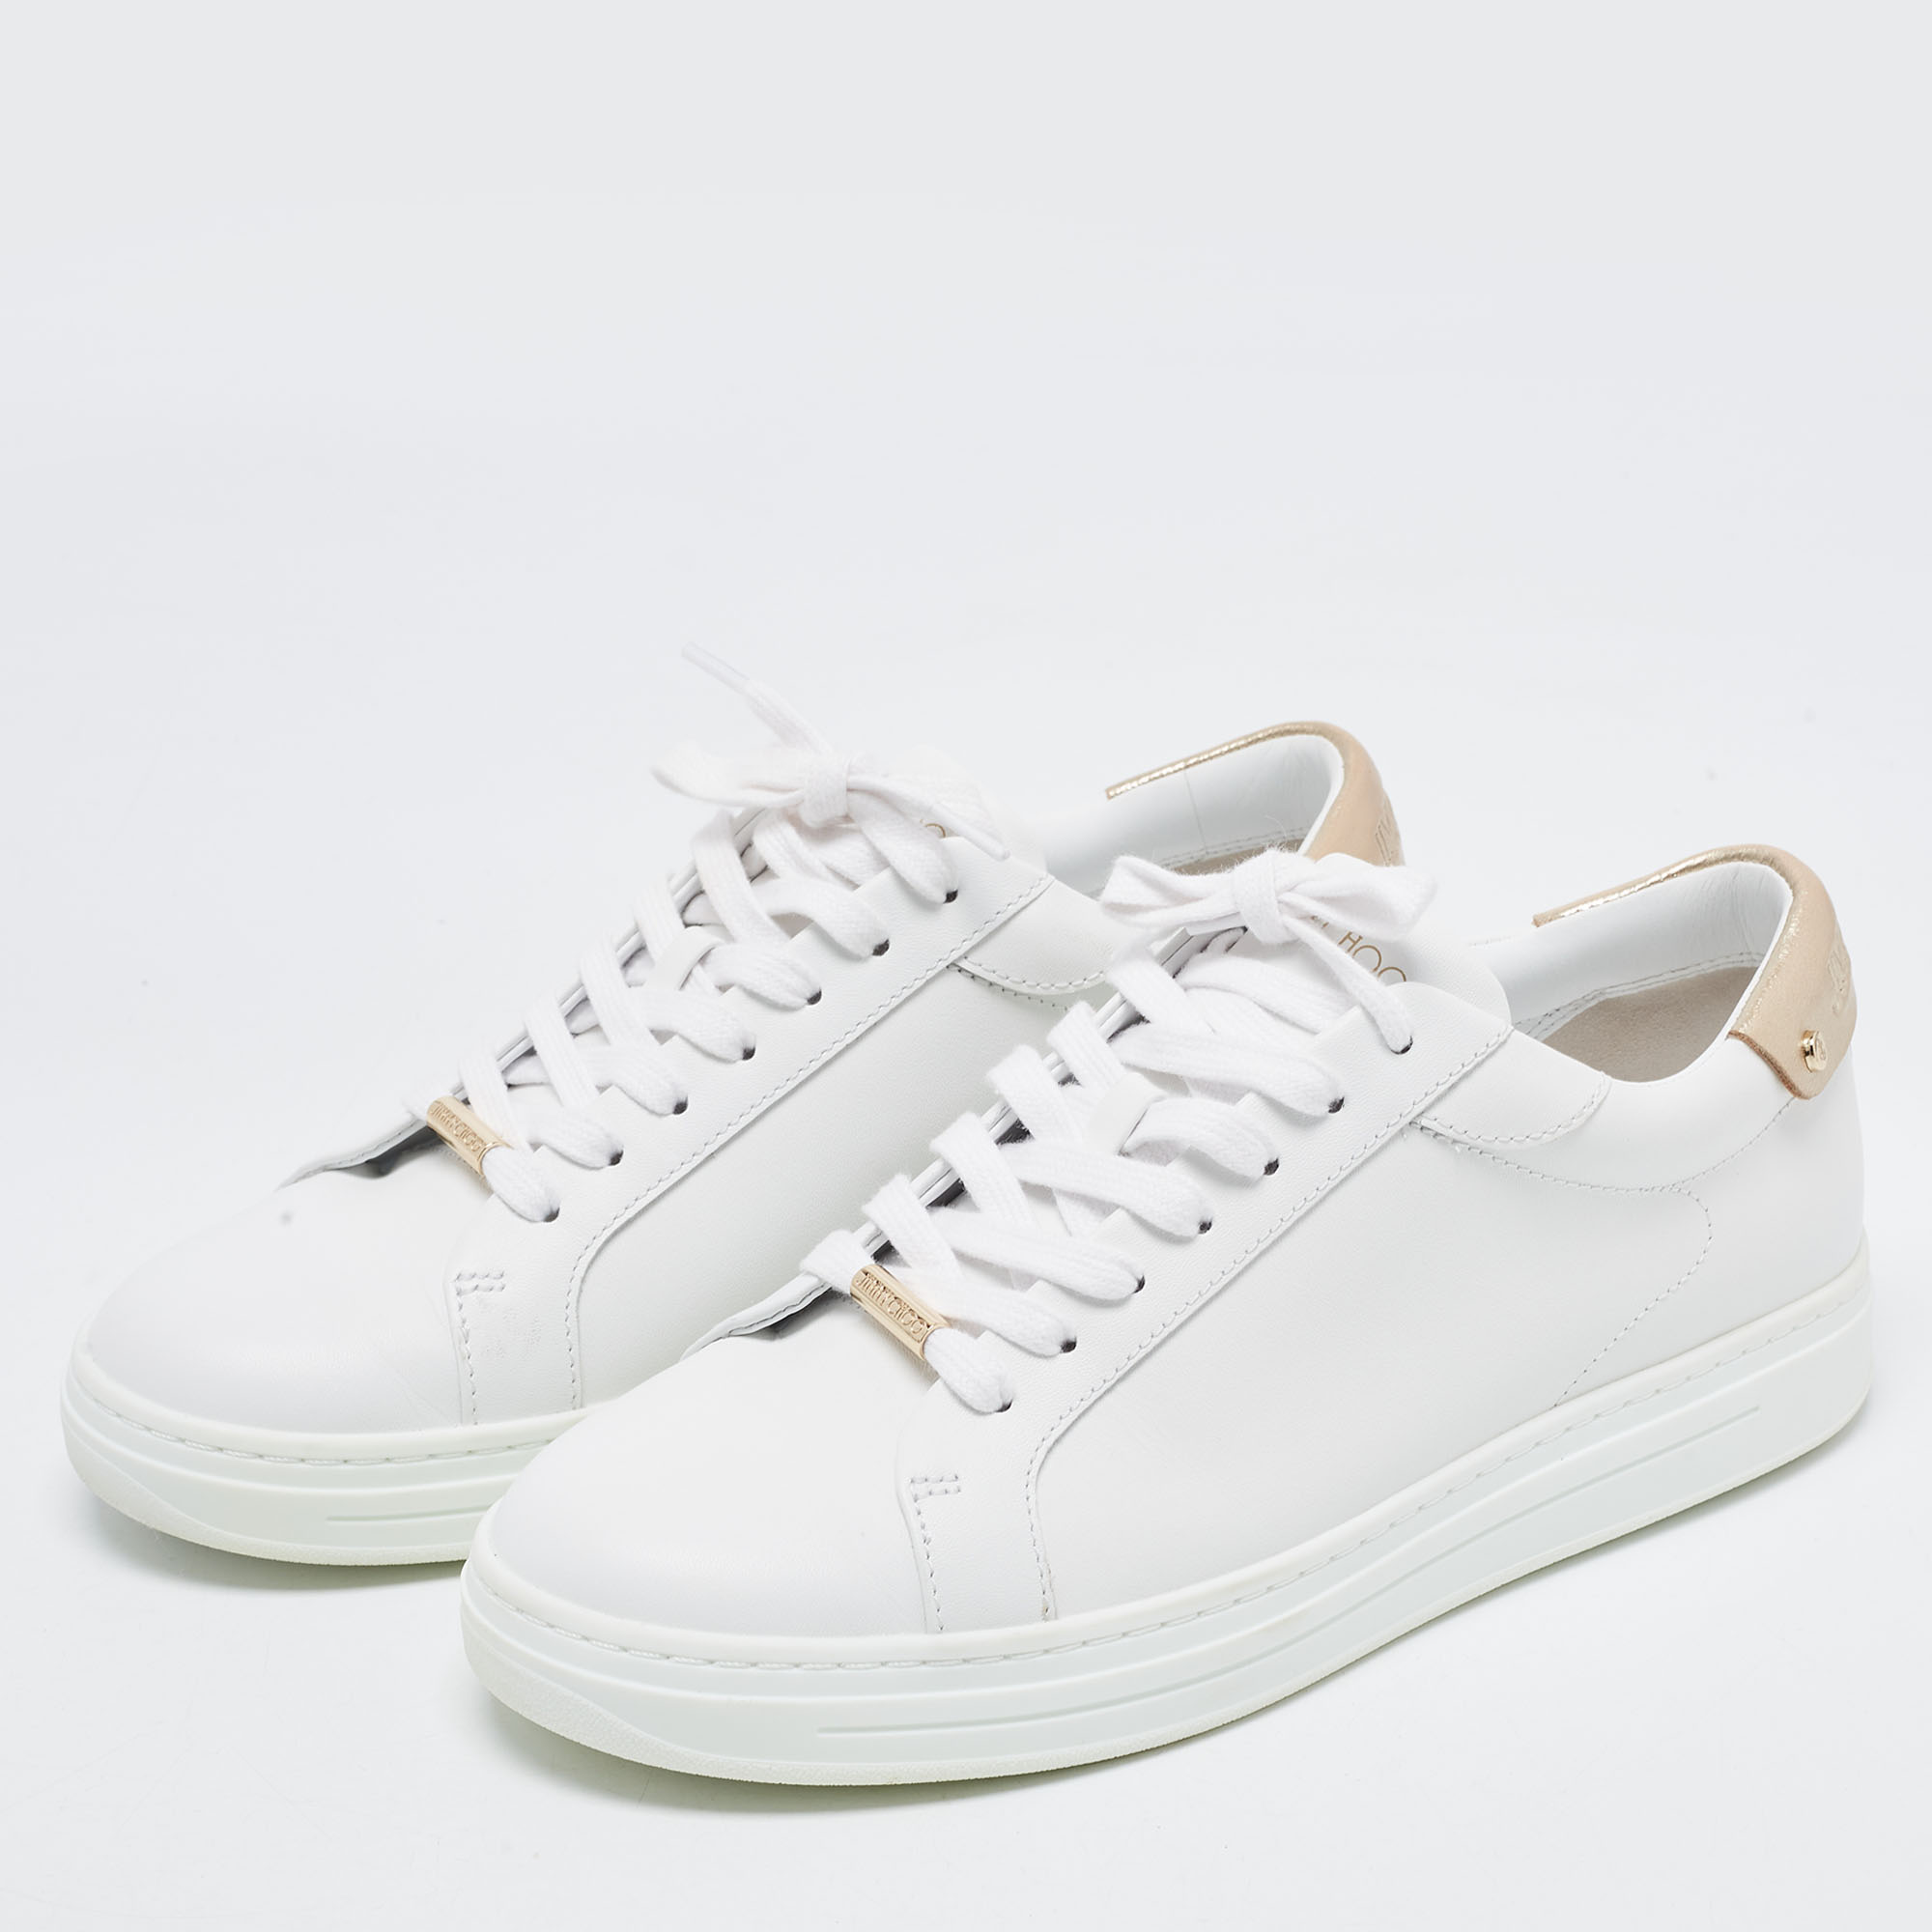 

Jimmy Choo White Leather Rome/F Low Top Sneakers Size